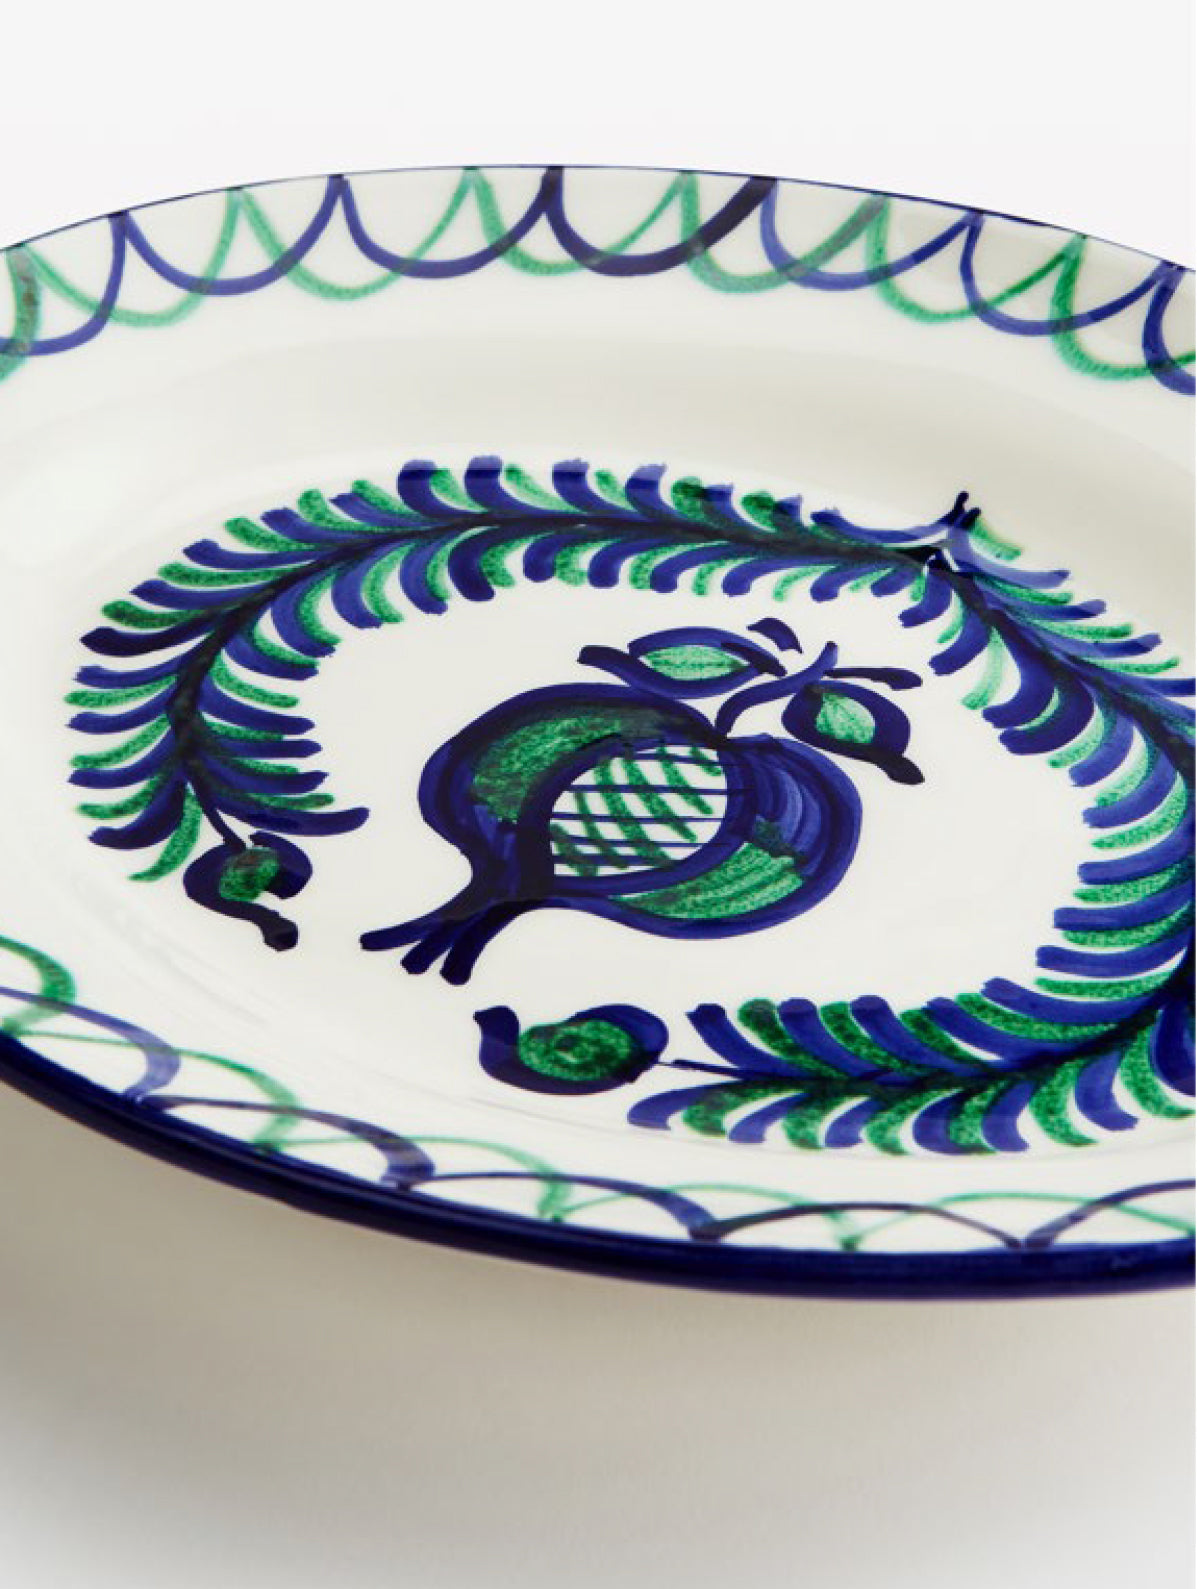 PLATTER - BLUE AND GREEN POMEGRANATE WITH BLUE AND GREEN SCALLOP PATTERNED EDGE